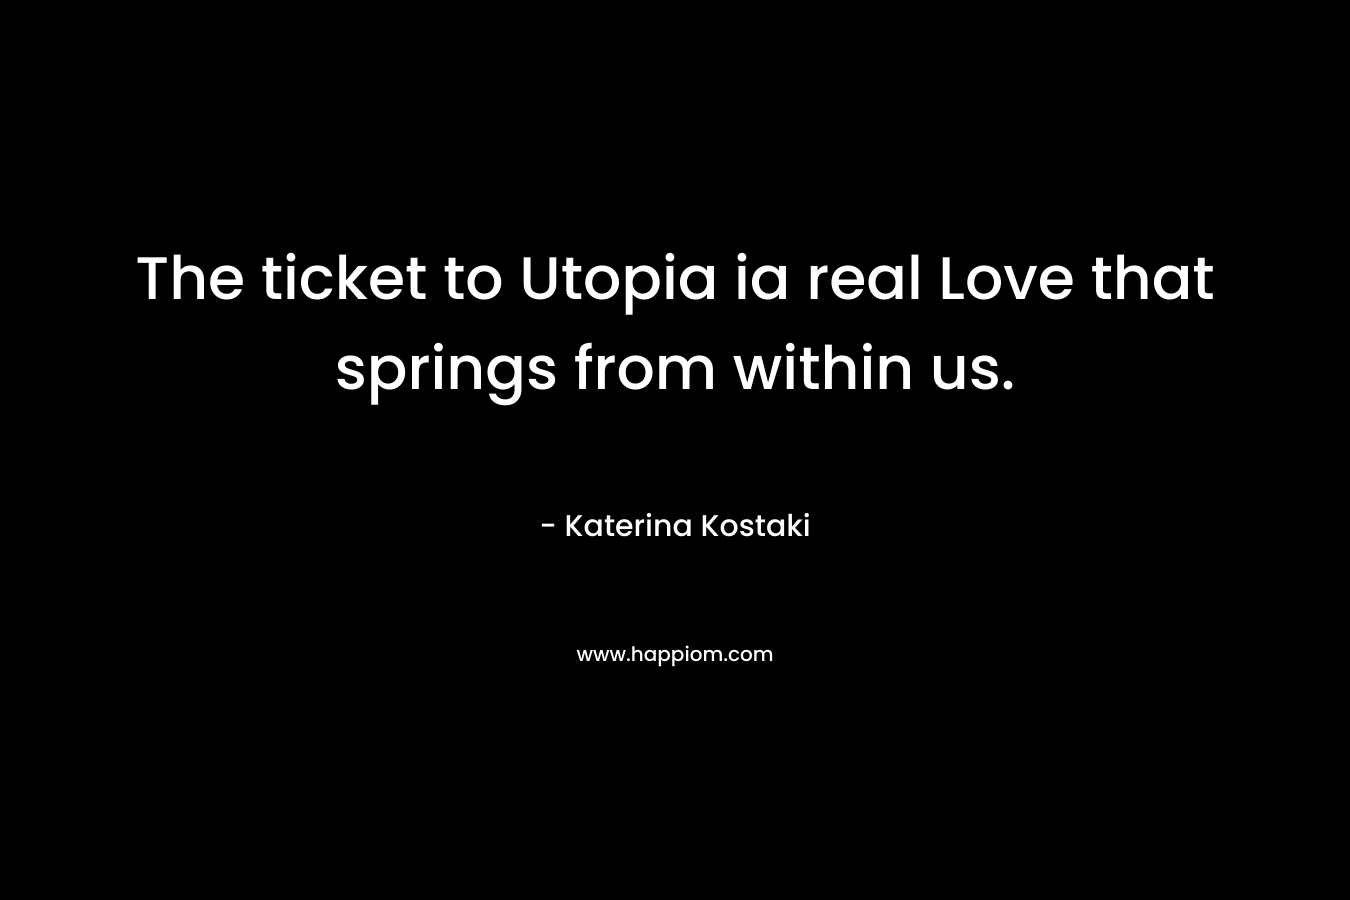 The ticket to Utopia ia real Love that springs from within us.